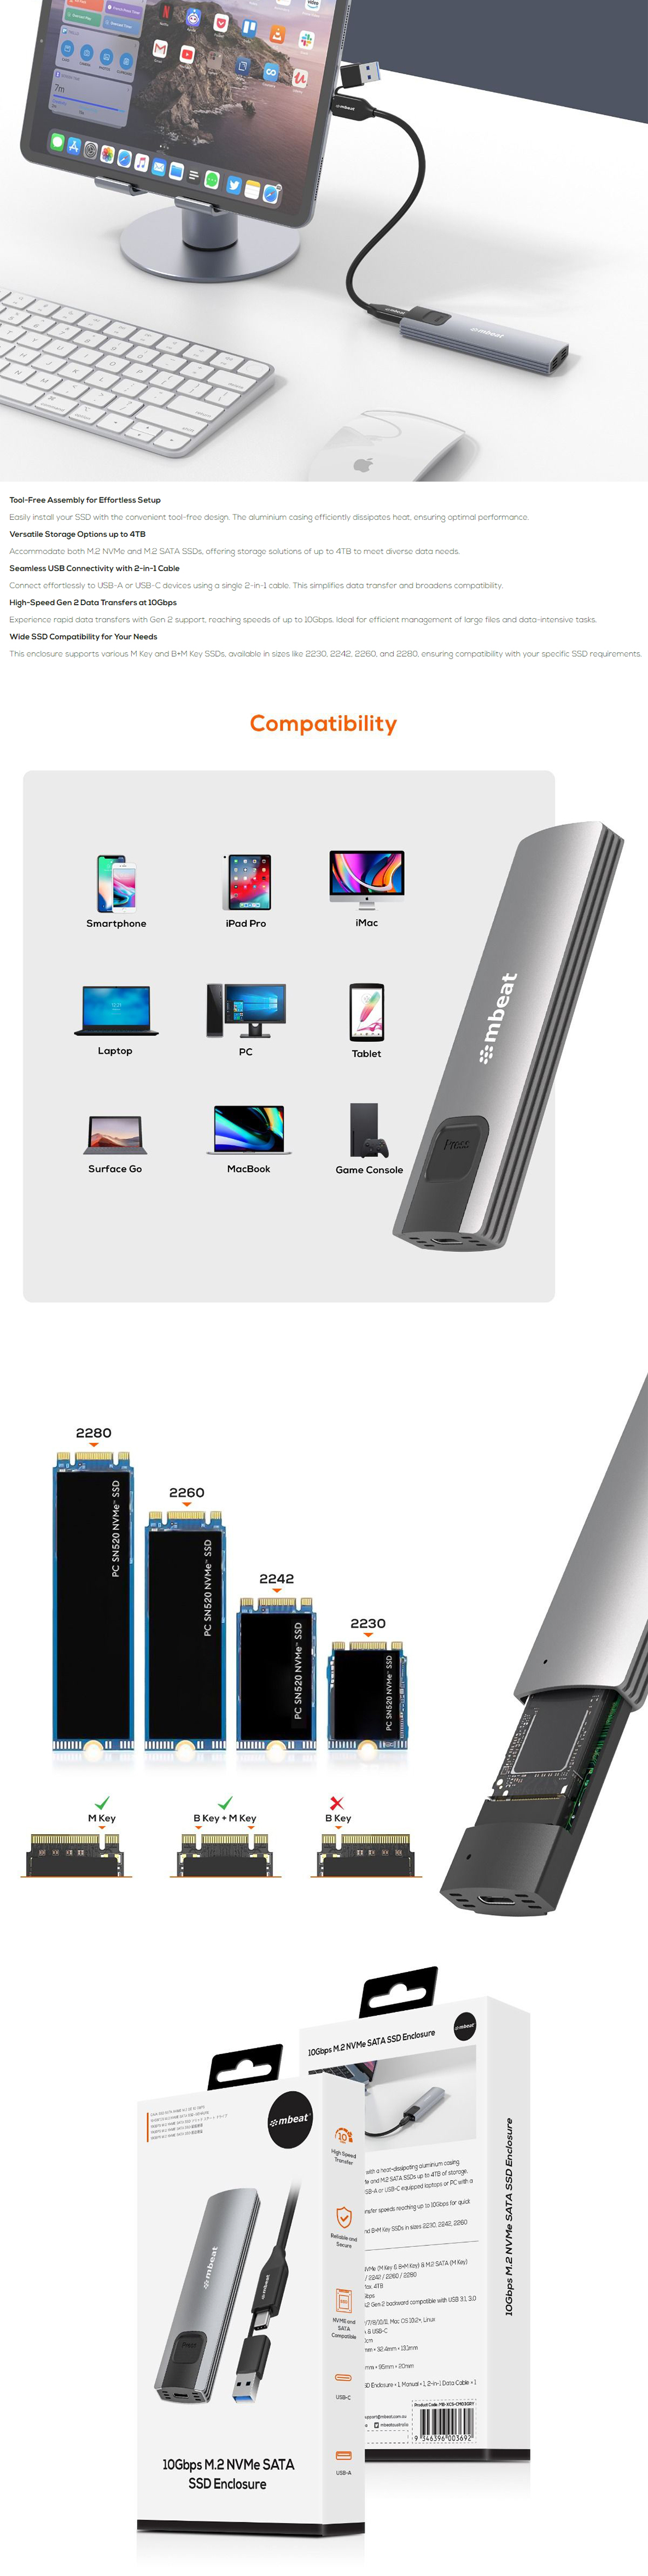 A large marketing image providing additional information about the product mBeat 10Gbps M.2 NVMe SATA and SSD Enclosure - Grey - Additional alt info not provided